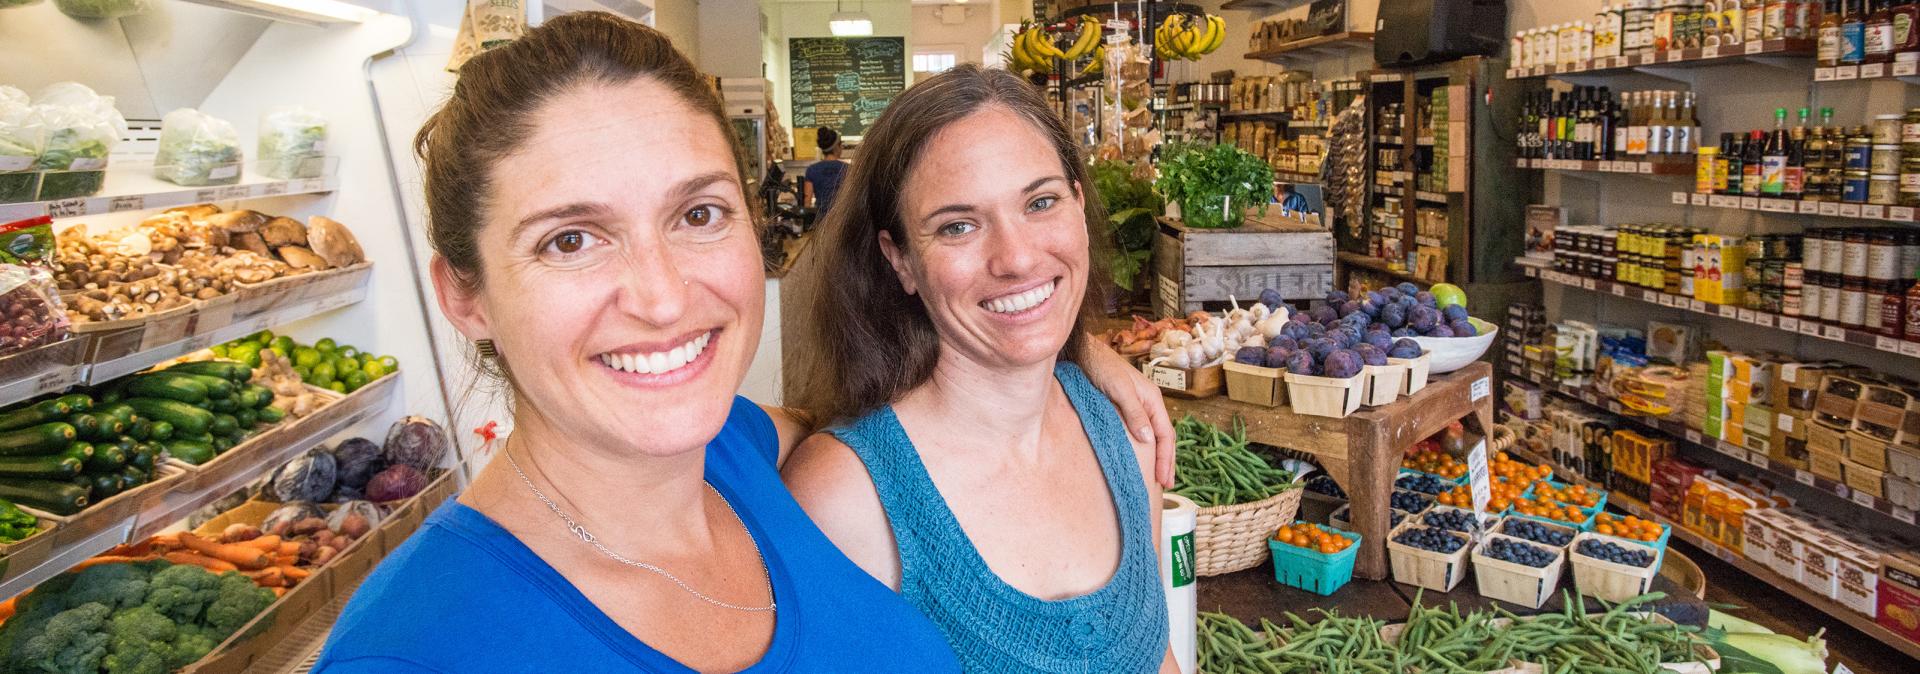 Women smiling in produce section.